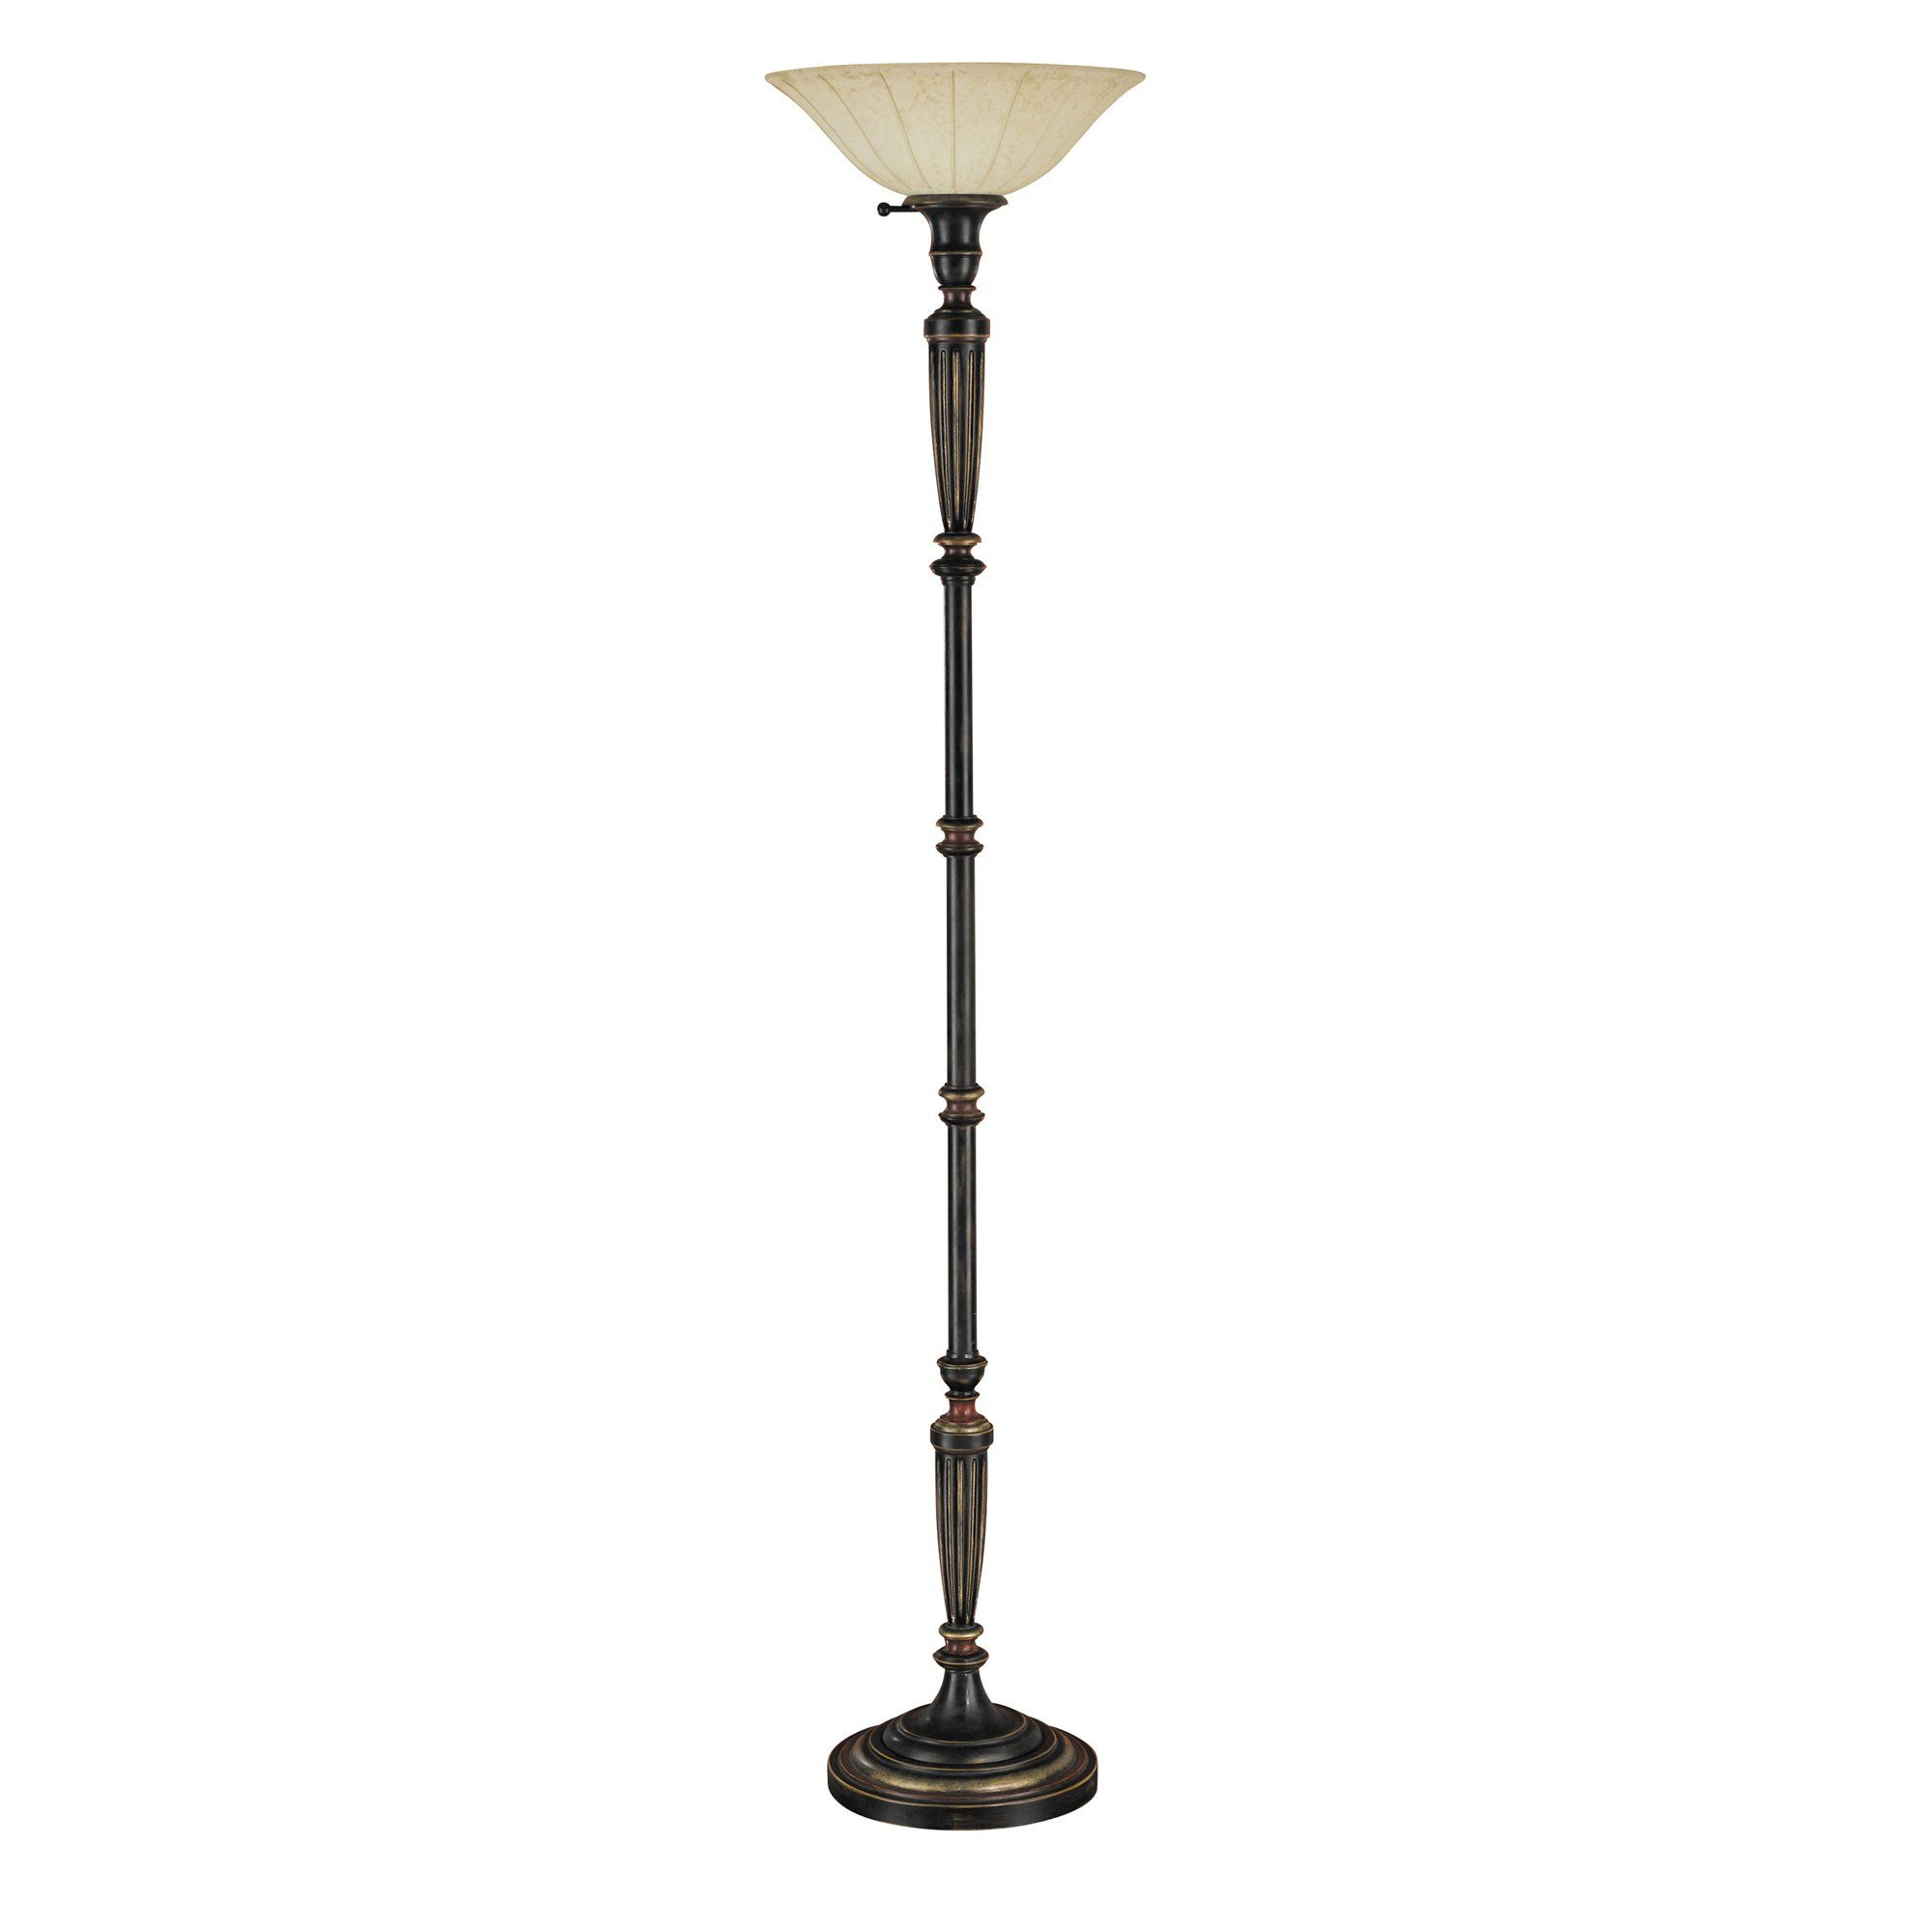 Murray Feiss T1158rw Chandler Library Floor Lamp Rubbed intended for proportions 2000 X 2000